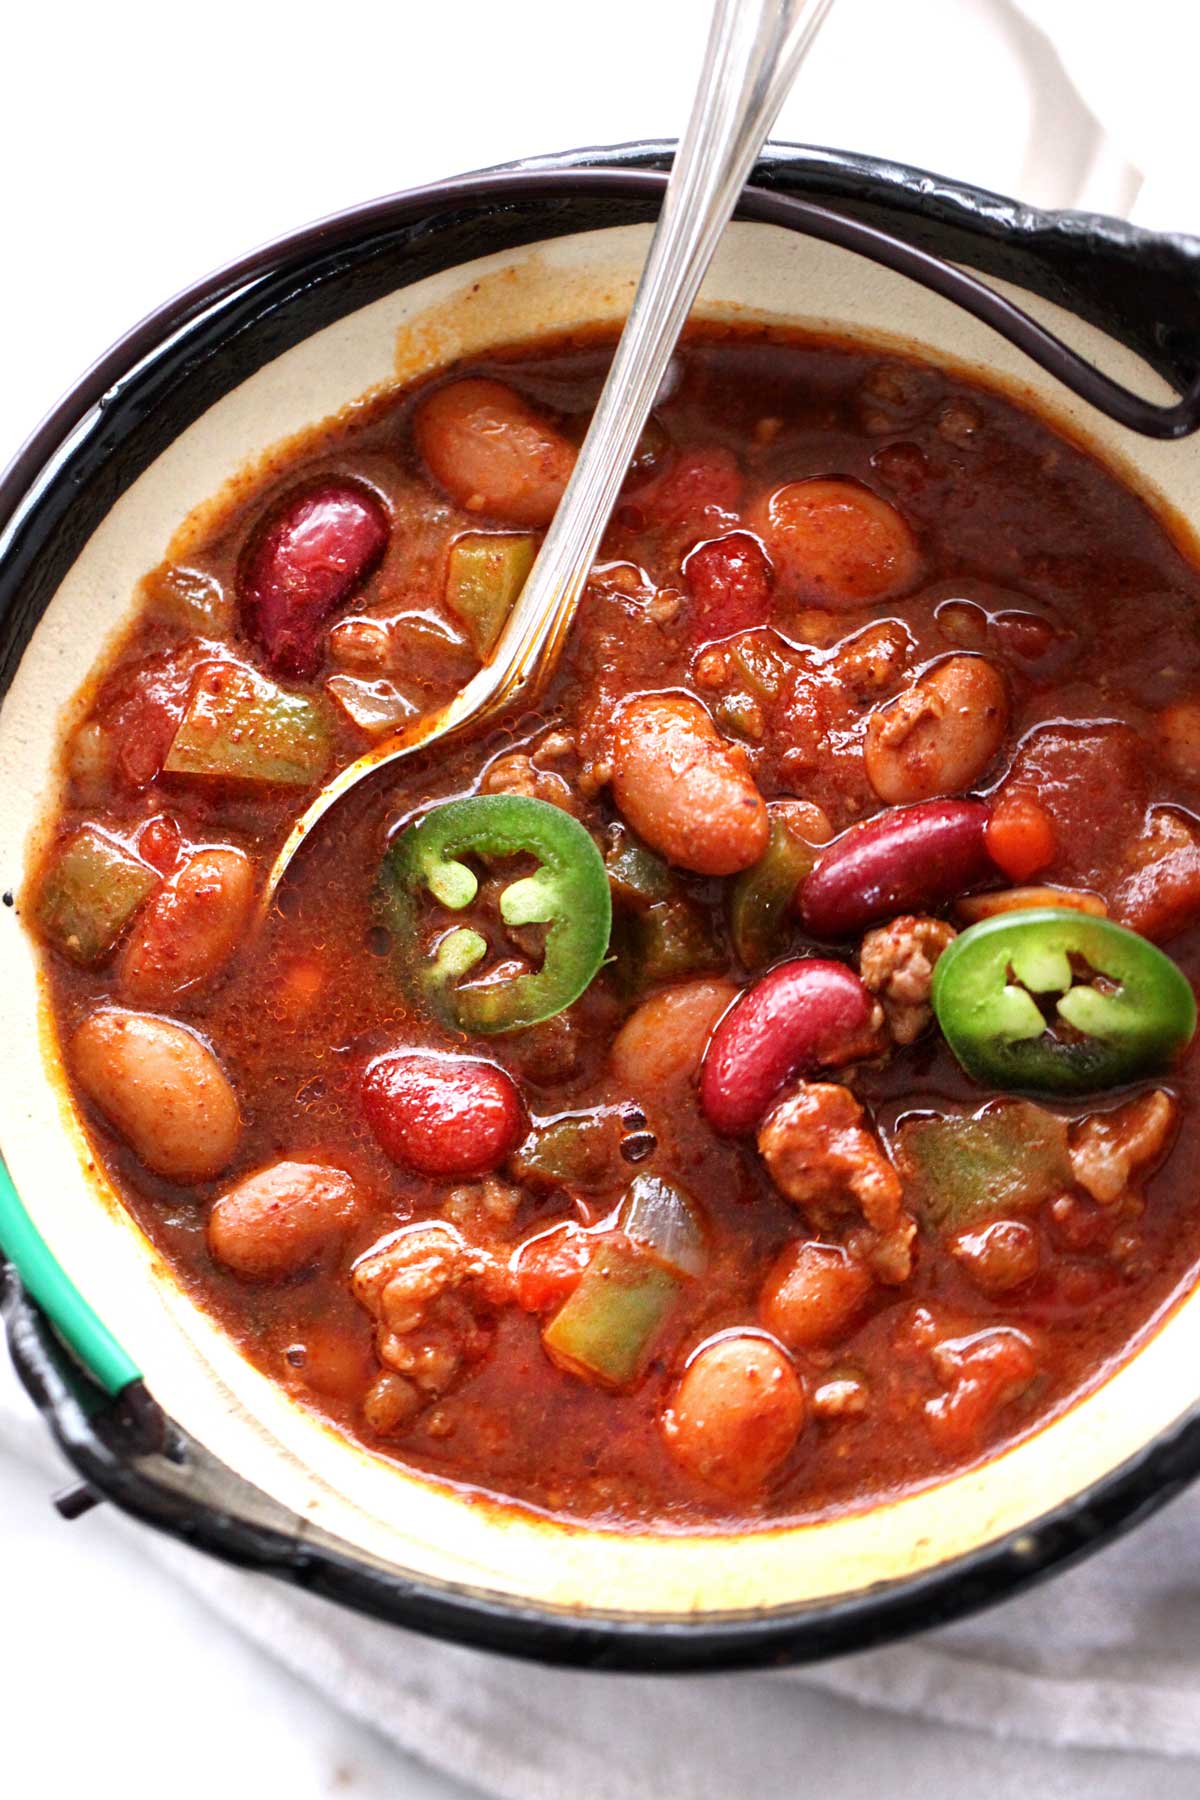 Meat And Bean Chili Foodiecrush.com 026 